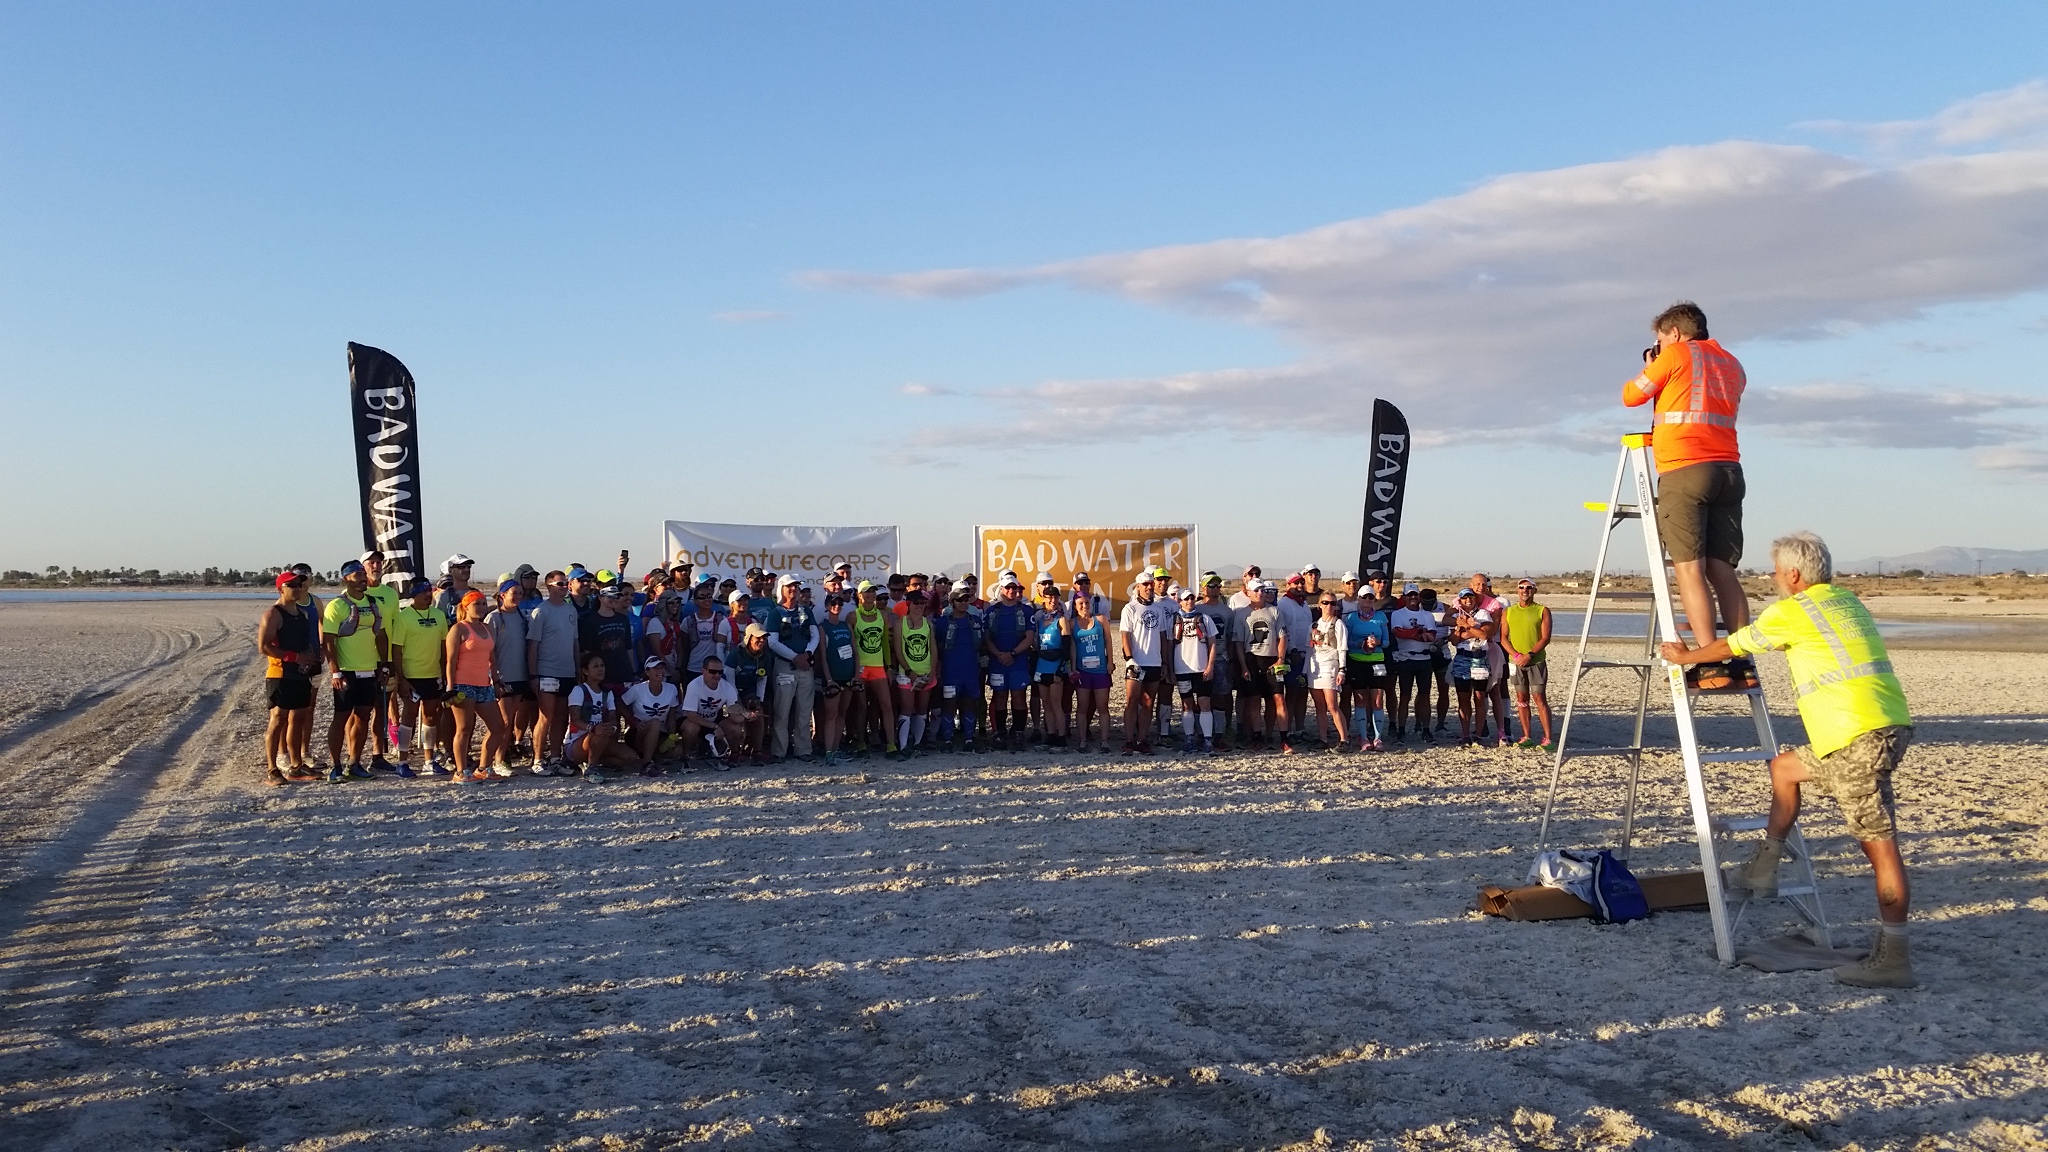 The teams are lined up and ready to go at the start of the 2016 Badwater Salton Sea ultra run while the race director, Chris, takes photos.